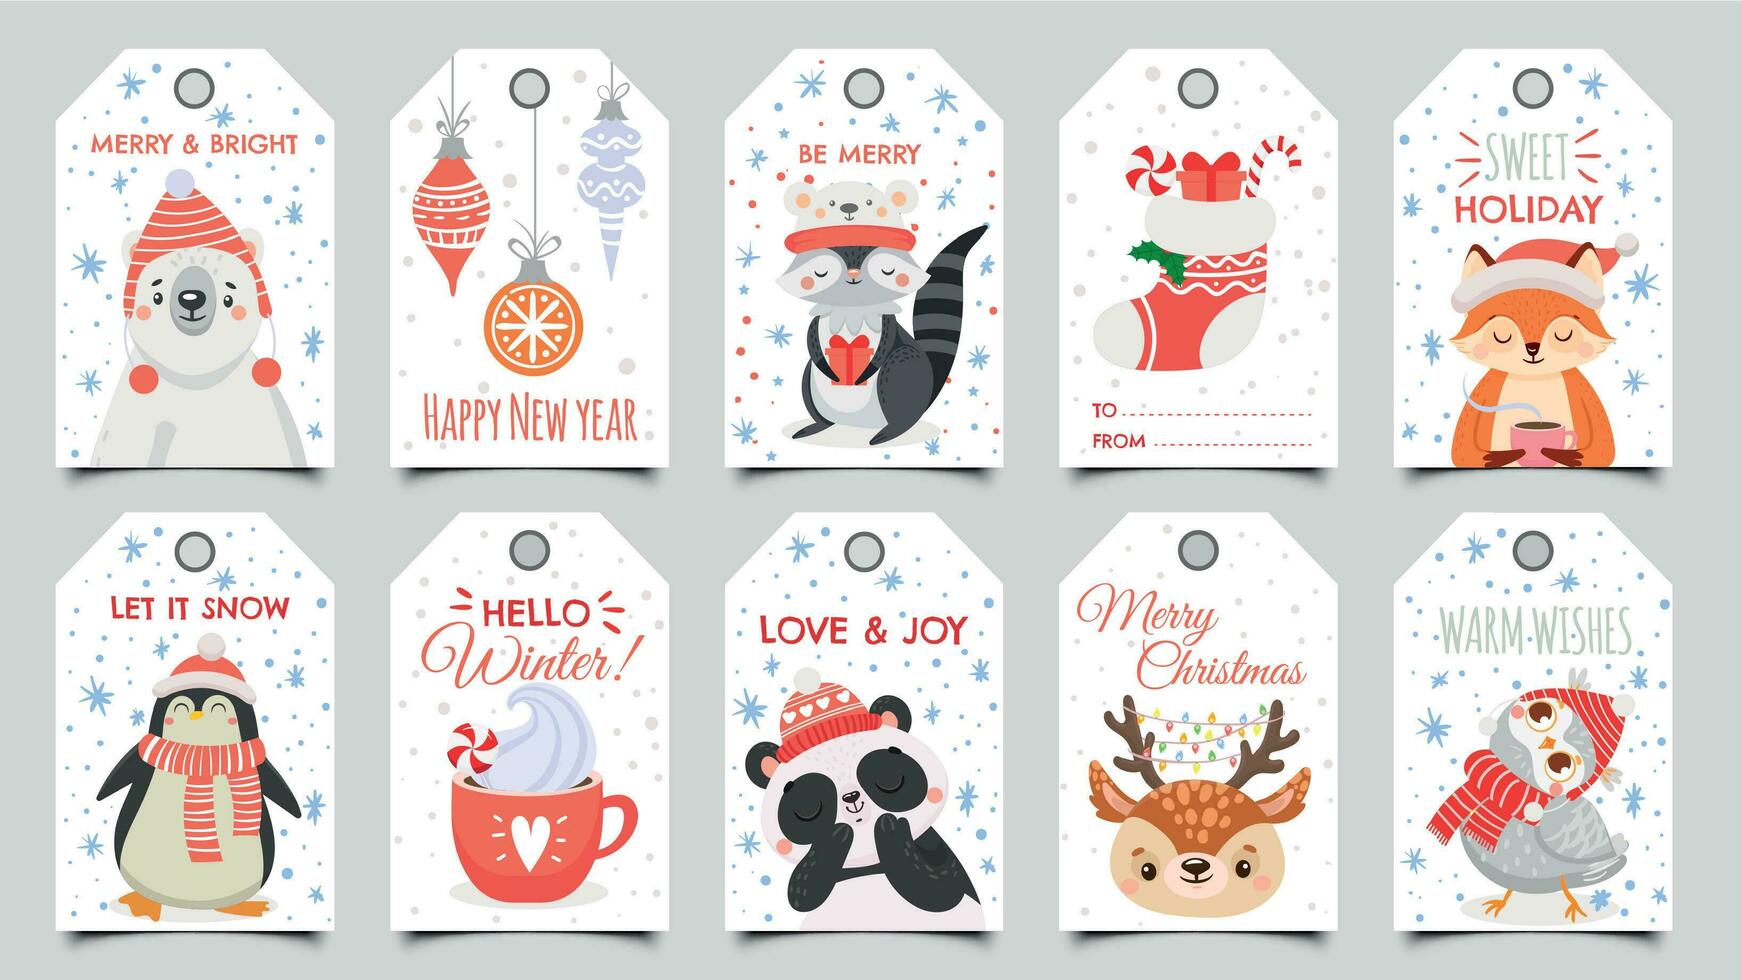 Cute animals christmas tags. Holiday gift tag with winter owl, deer and bears. Happy animal celebrate xmas label cartoon vector set